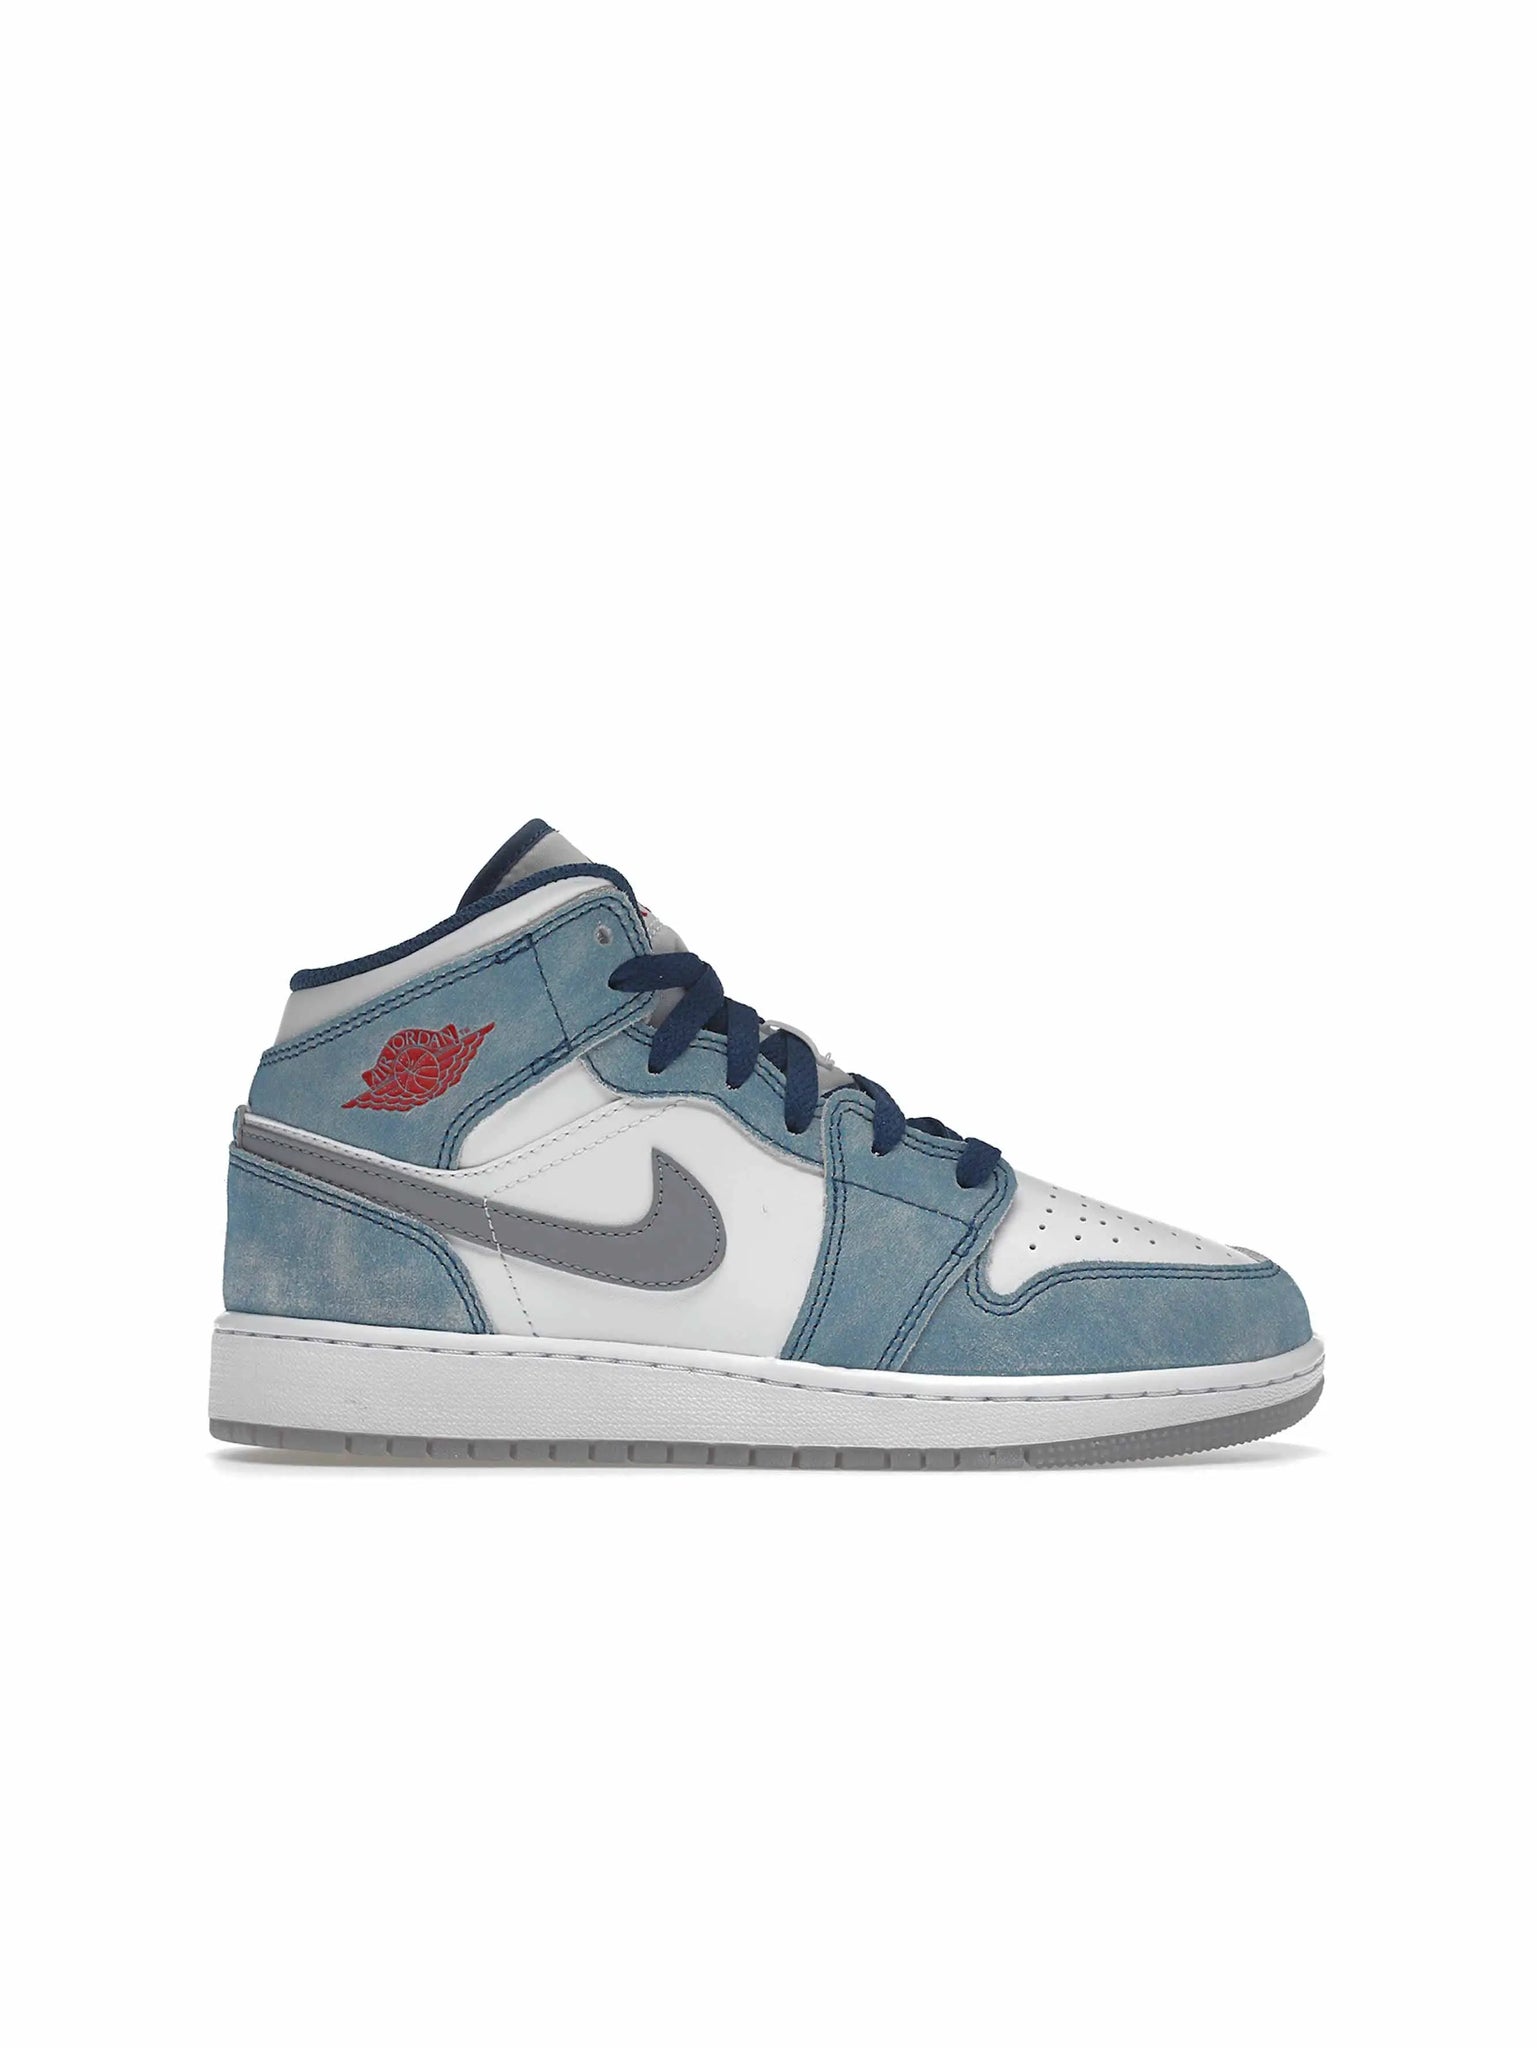 Nike Air Jordan 1 Mid French Blue Fire Red (GS) Prior